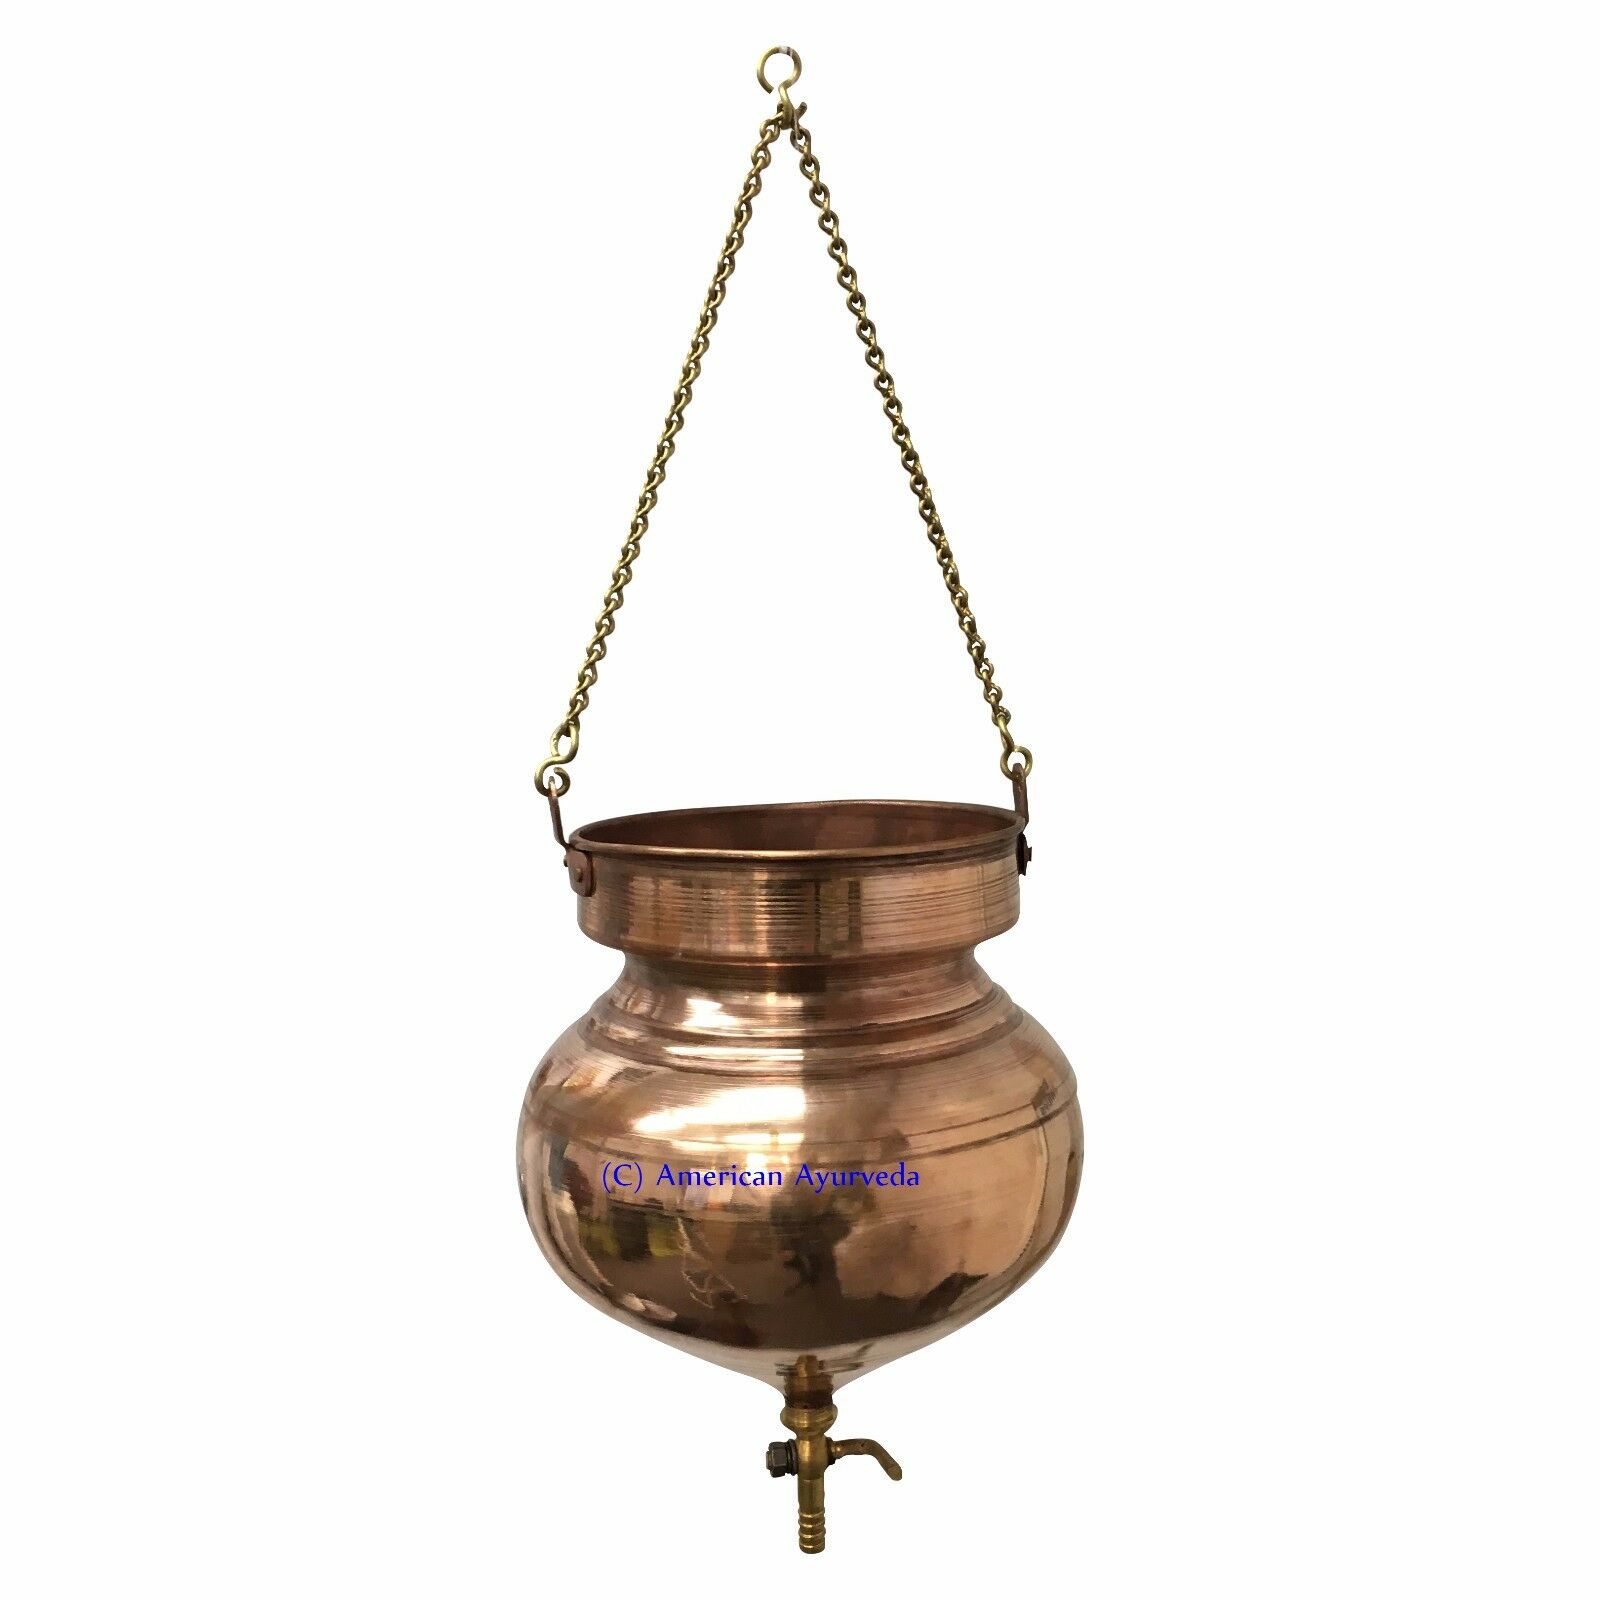 Pure Copper Shirodhara Pot With Or Without Control Valve For Ayurveda Panchkarma